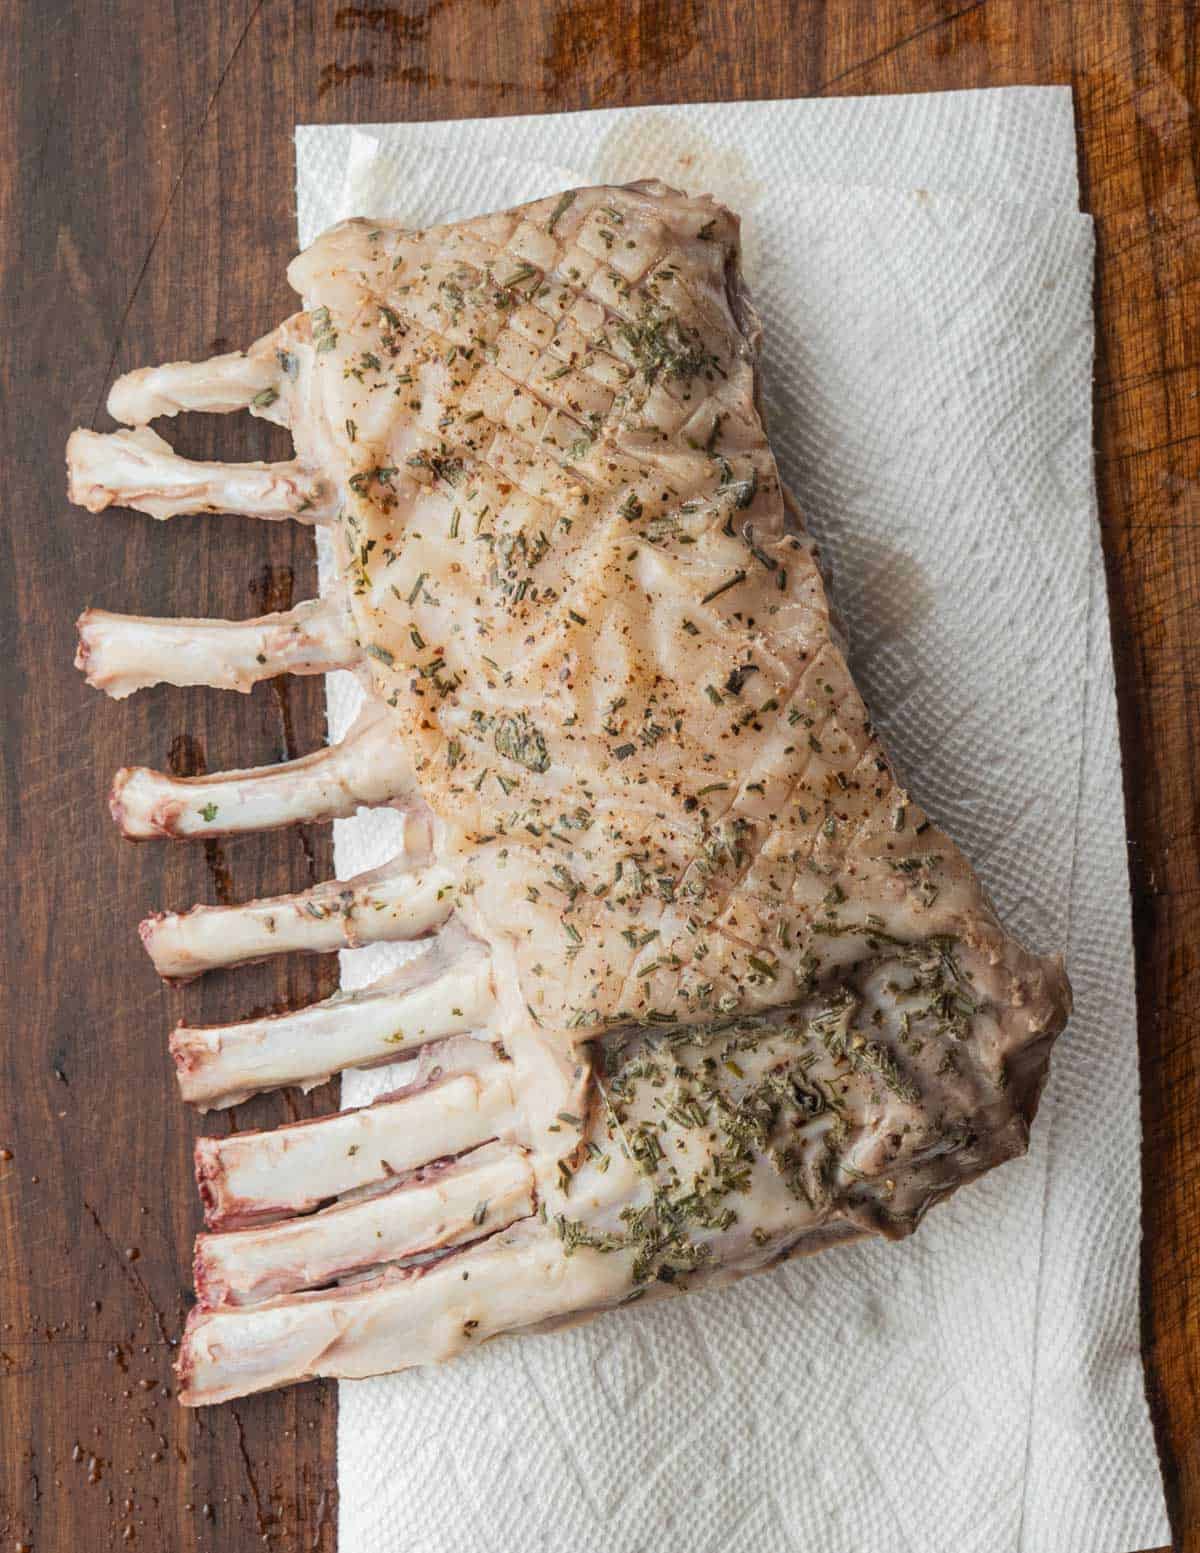 A whole rack of lamb cooked sous vide draining on a paper towel. 